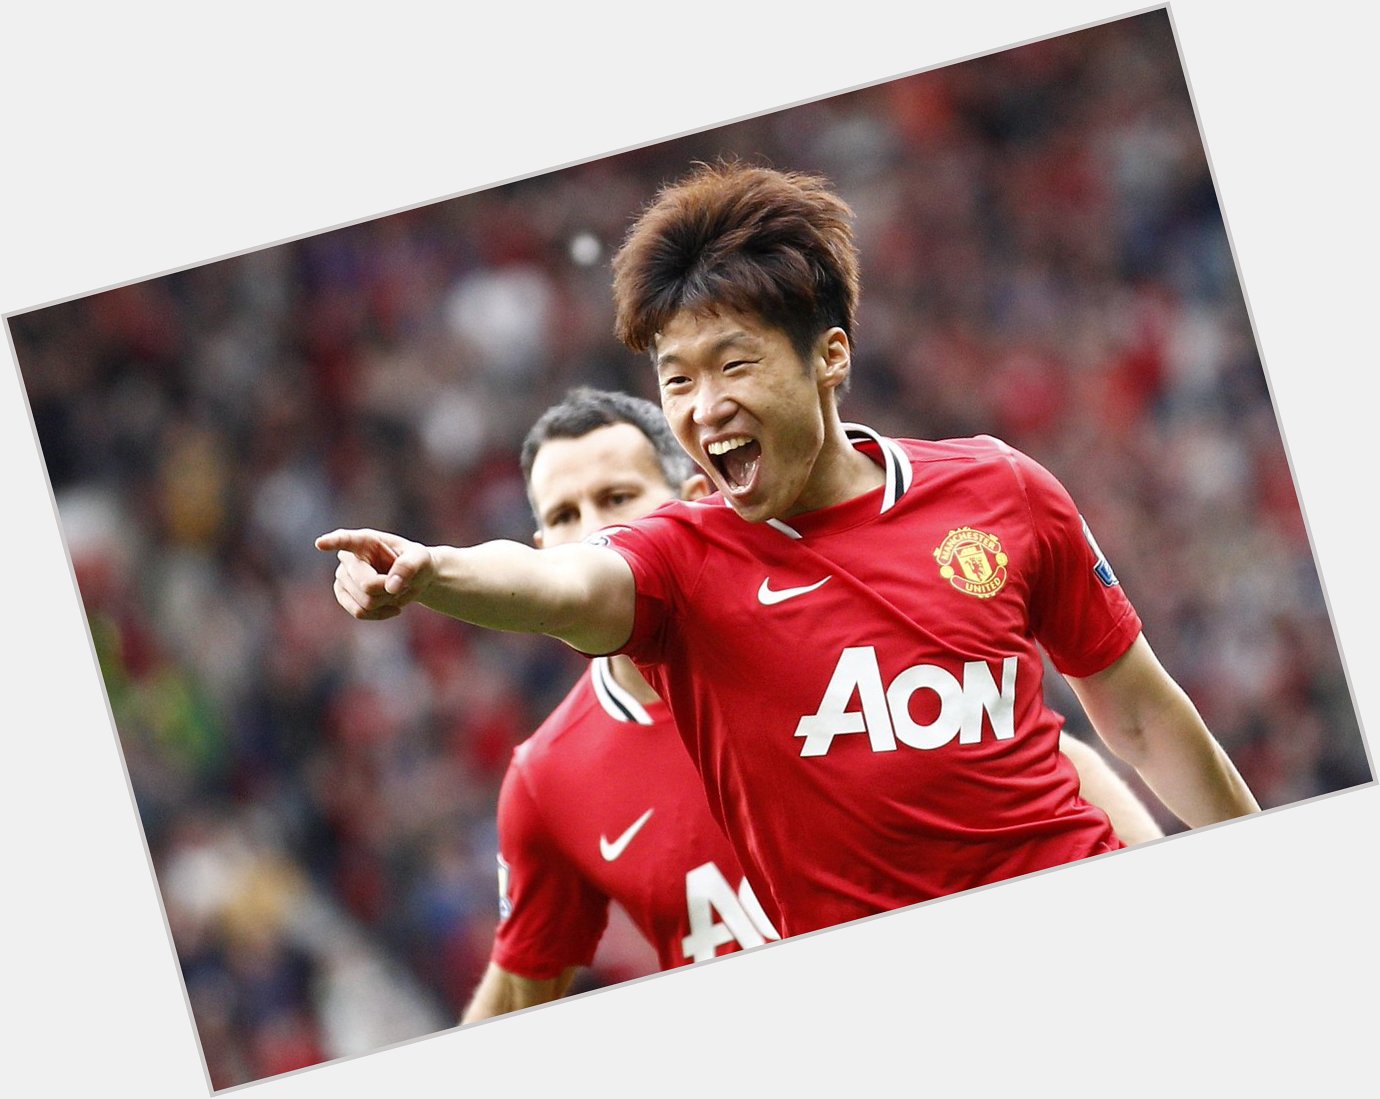 Happy birthday to one of the biggest cult heroes Park Ji-Sung  